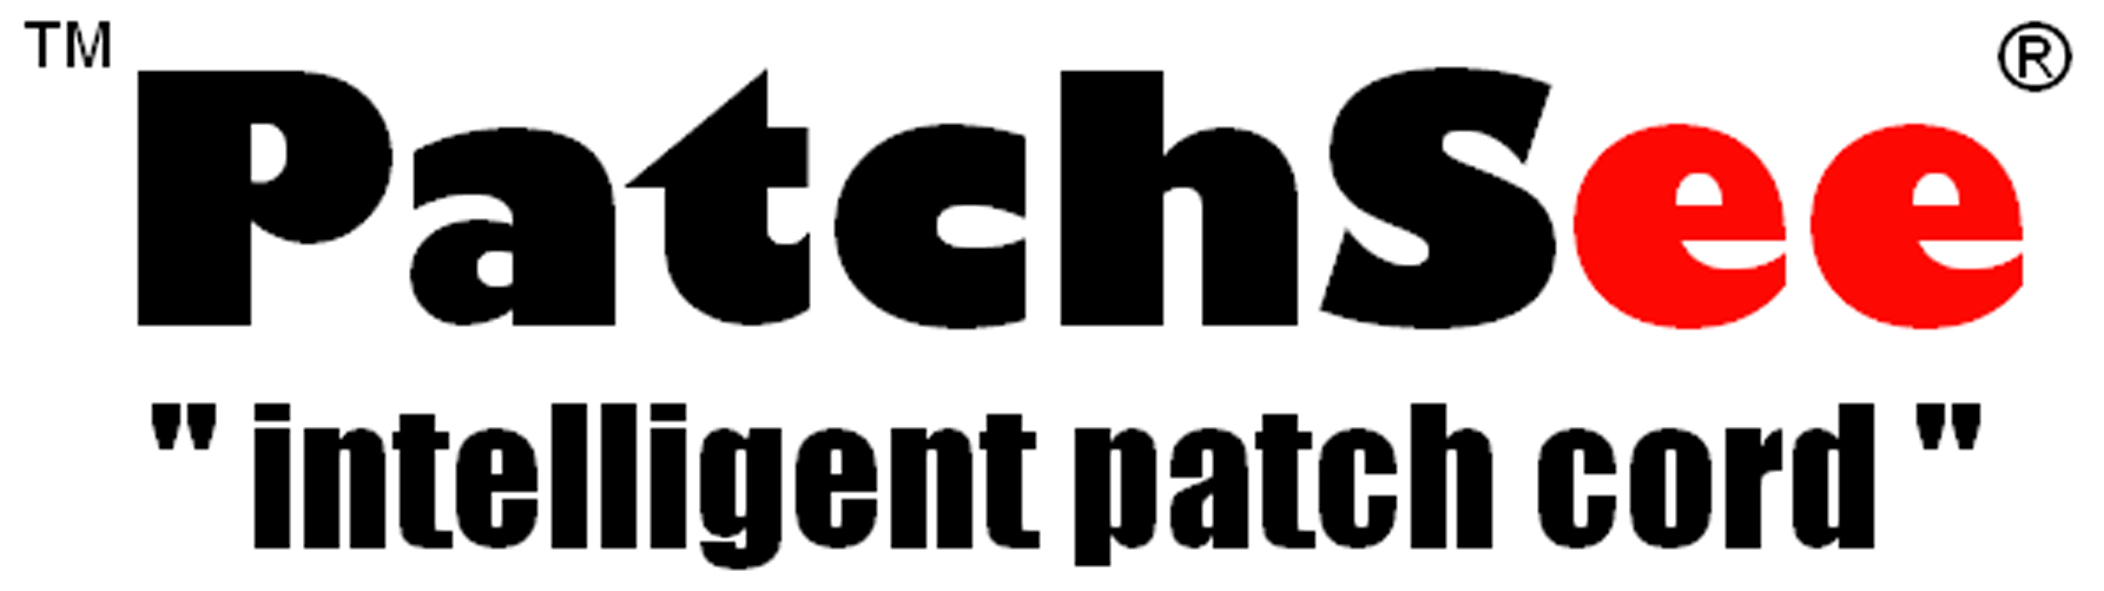 PatchSee Product Information